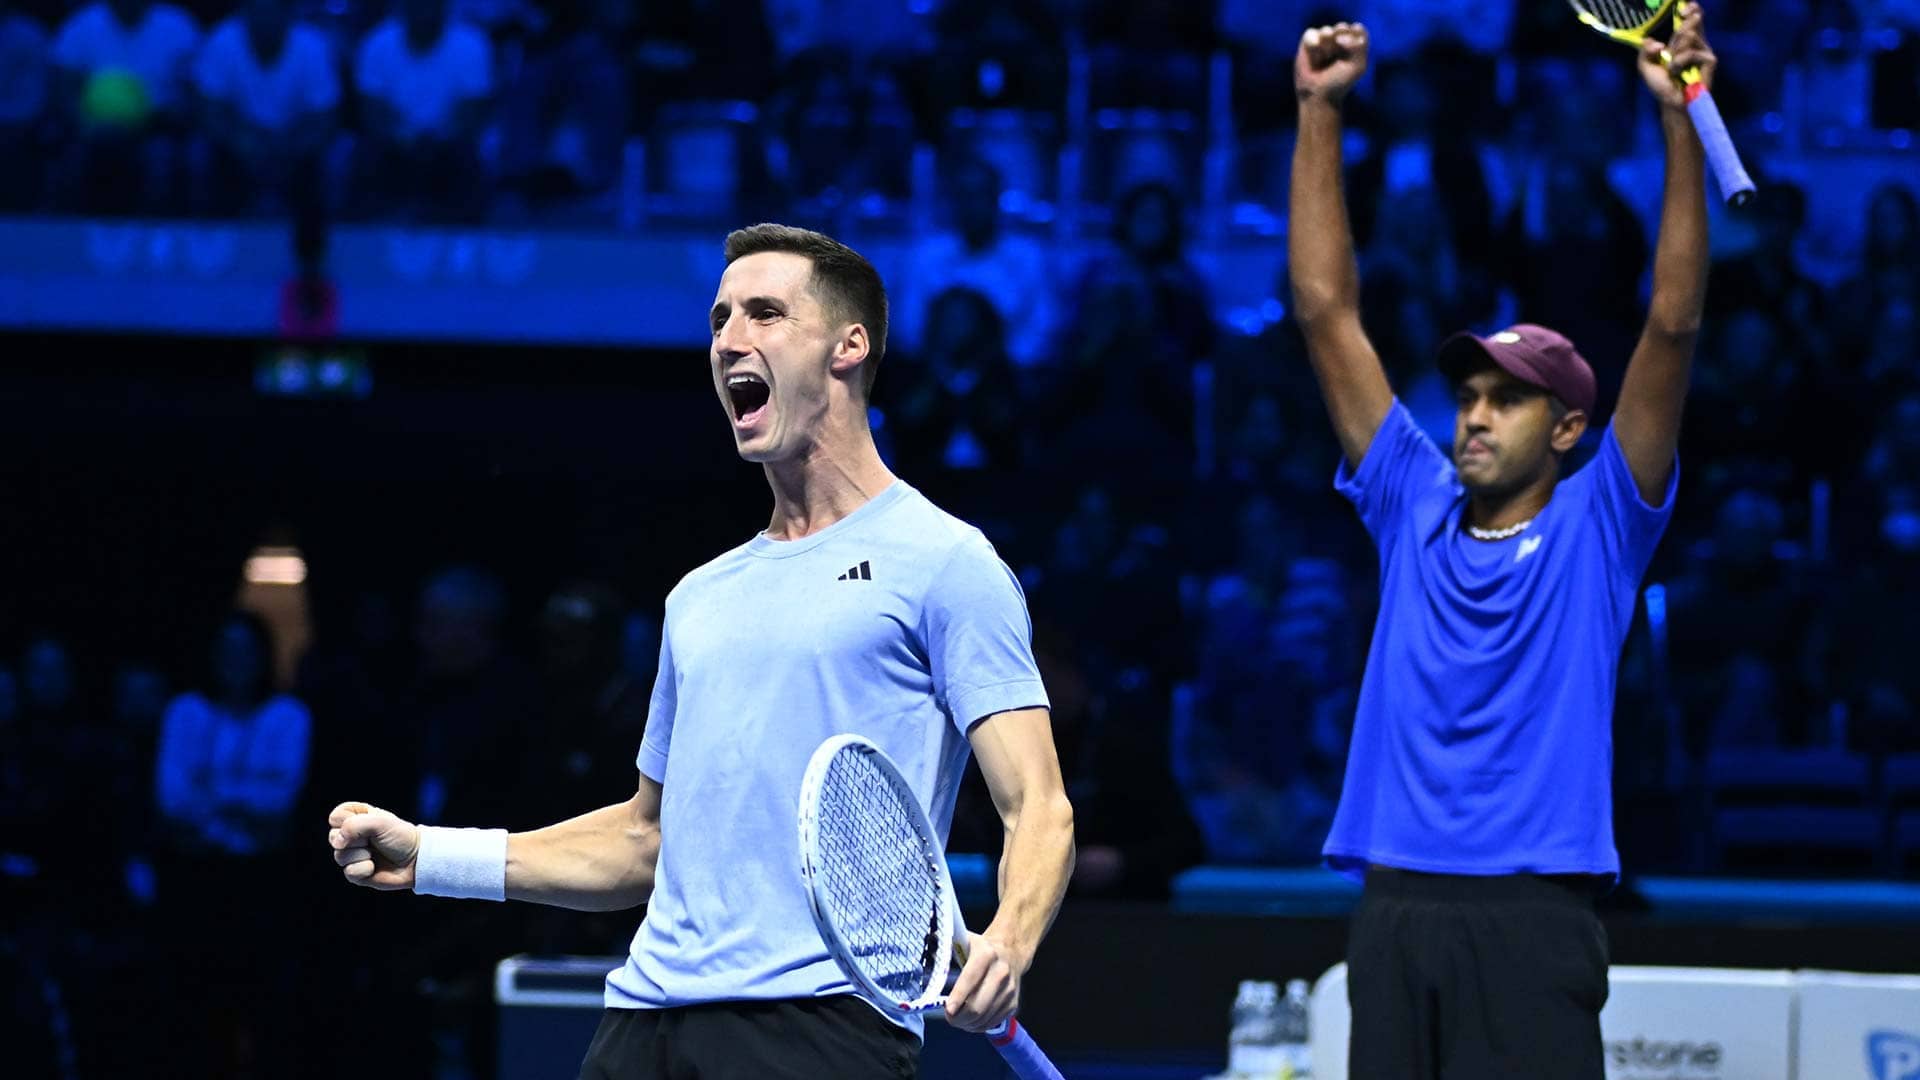 Third Time Lucky - Granollers and Zeballos are Champions - Rolex Shanghai  Masters: ATP Masters 1000 Tournament